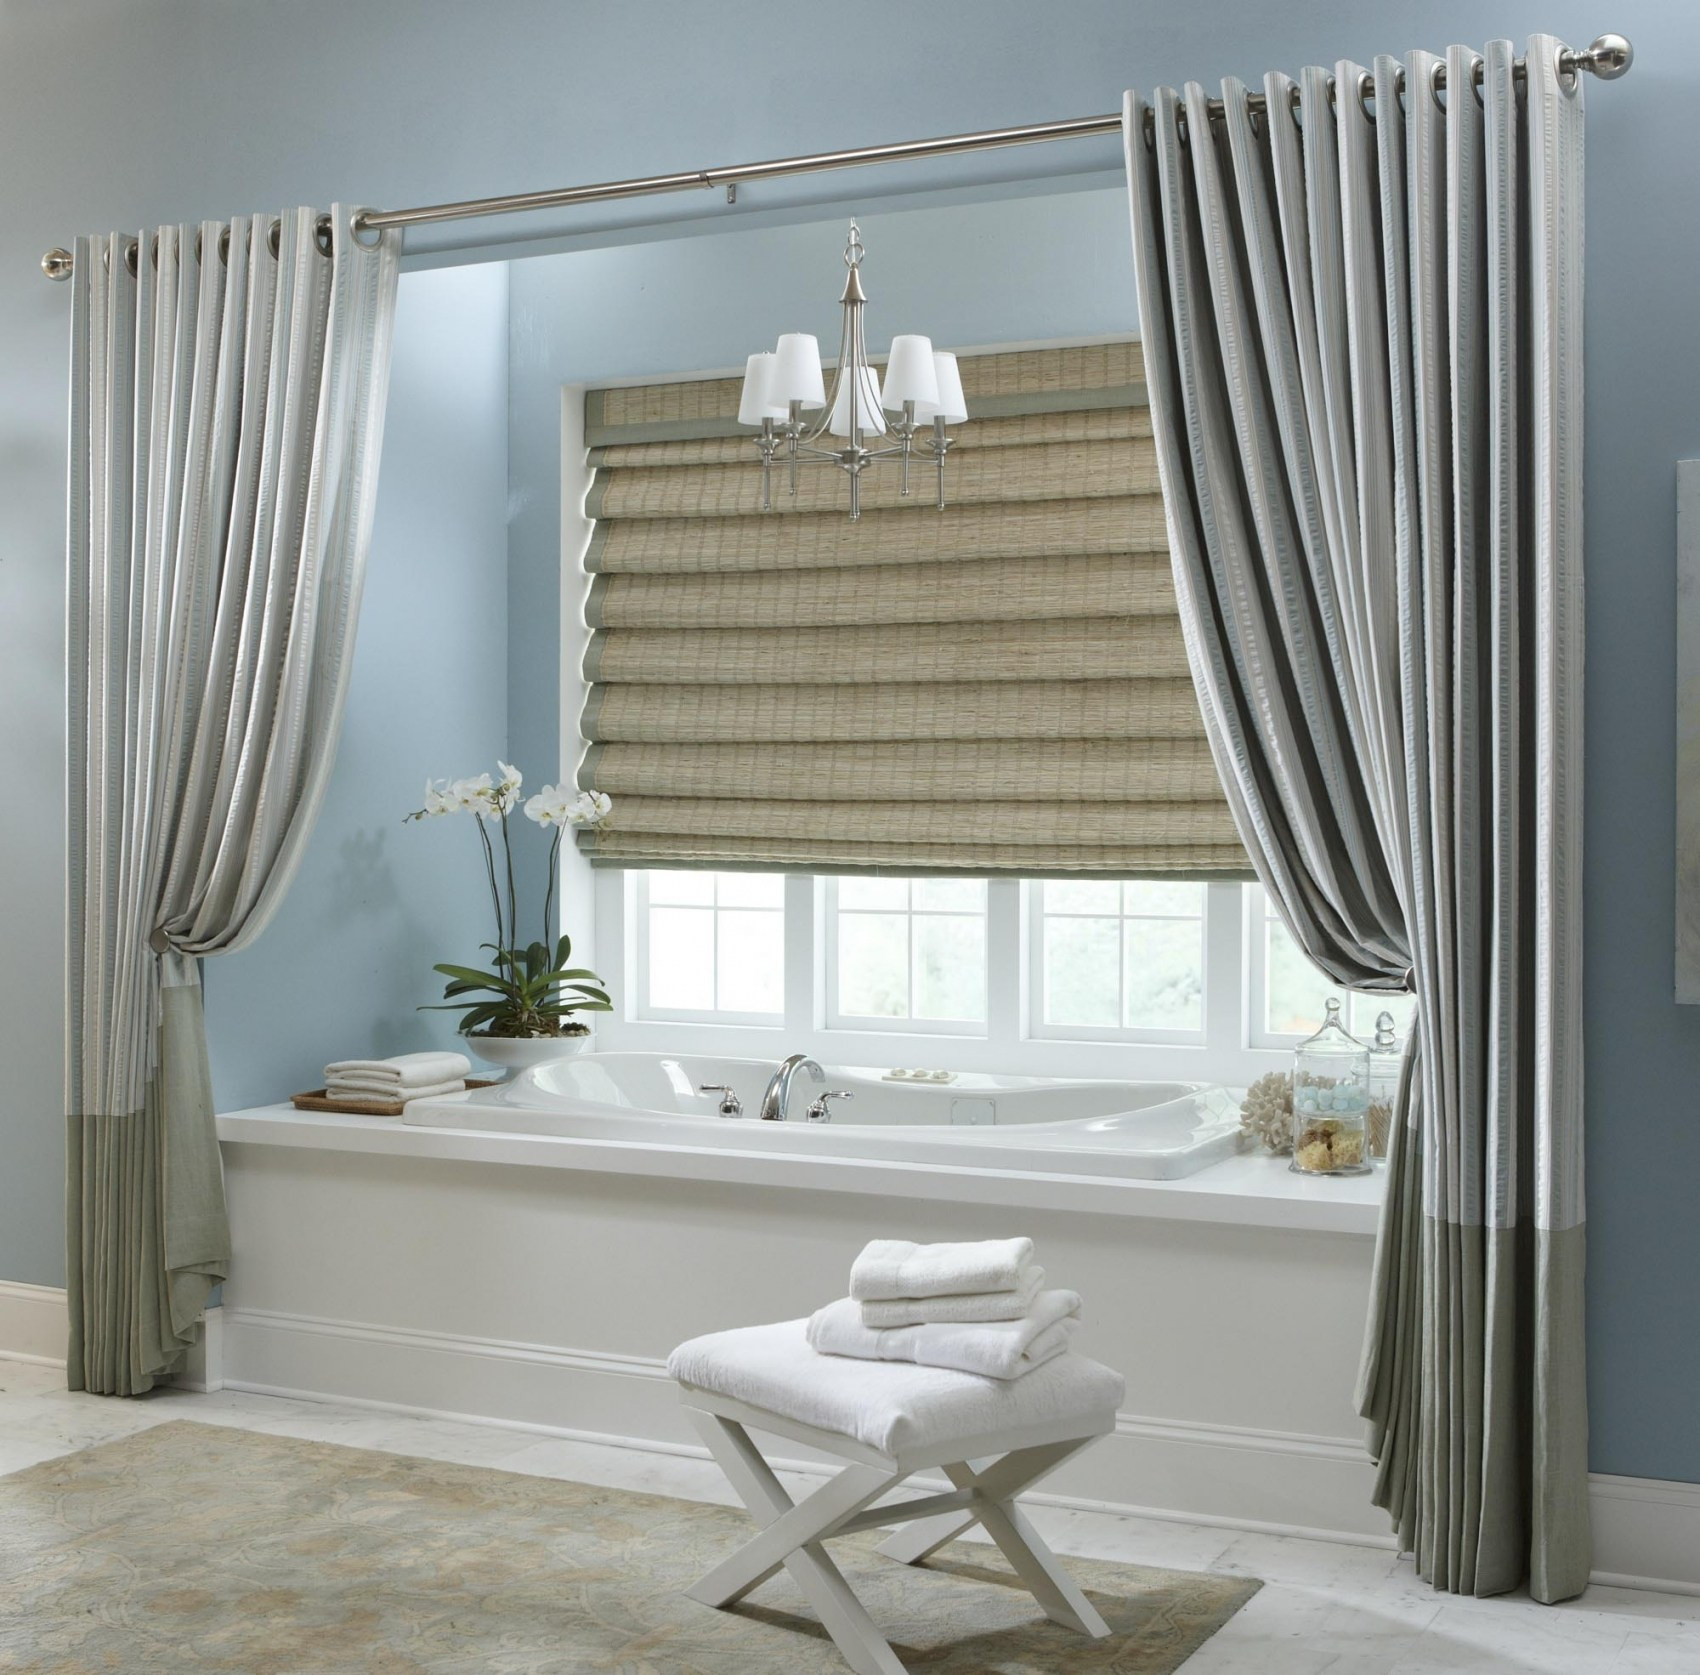 Sears Curtains For Living Room
 Jc Penny Curtains Living Room Living Room Valances Awesome